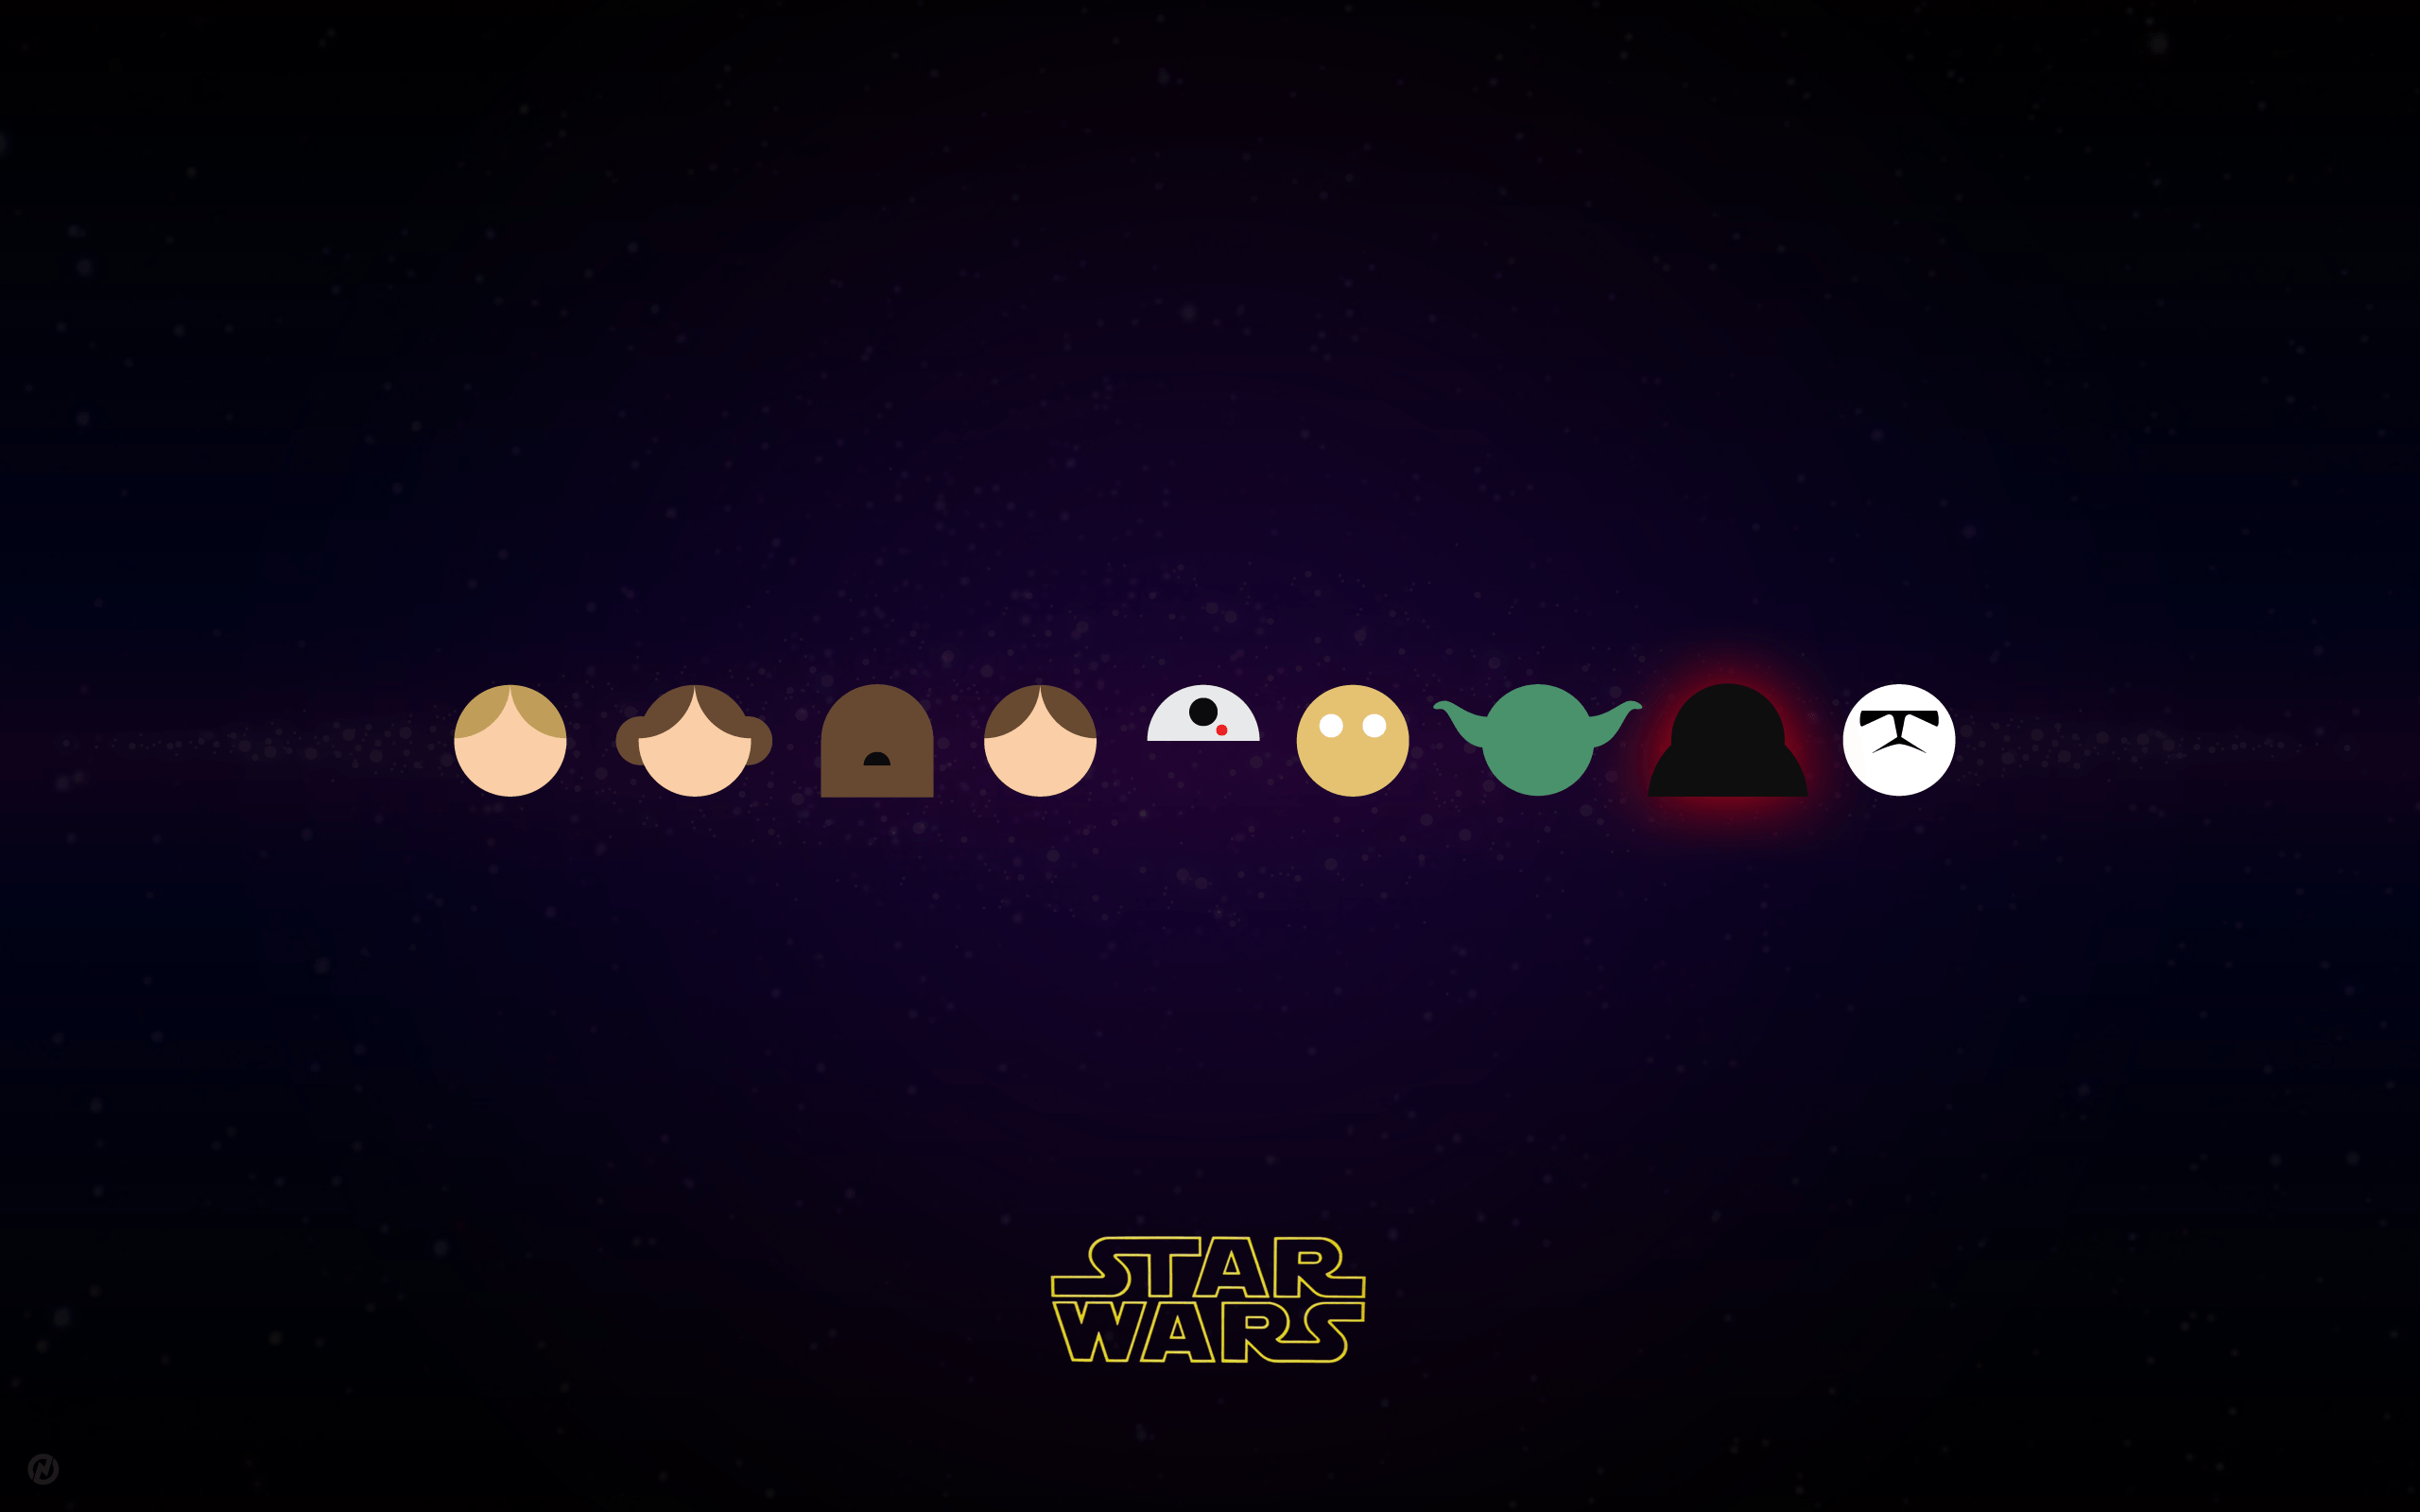 Star Wars Characters in Vector